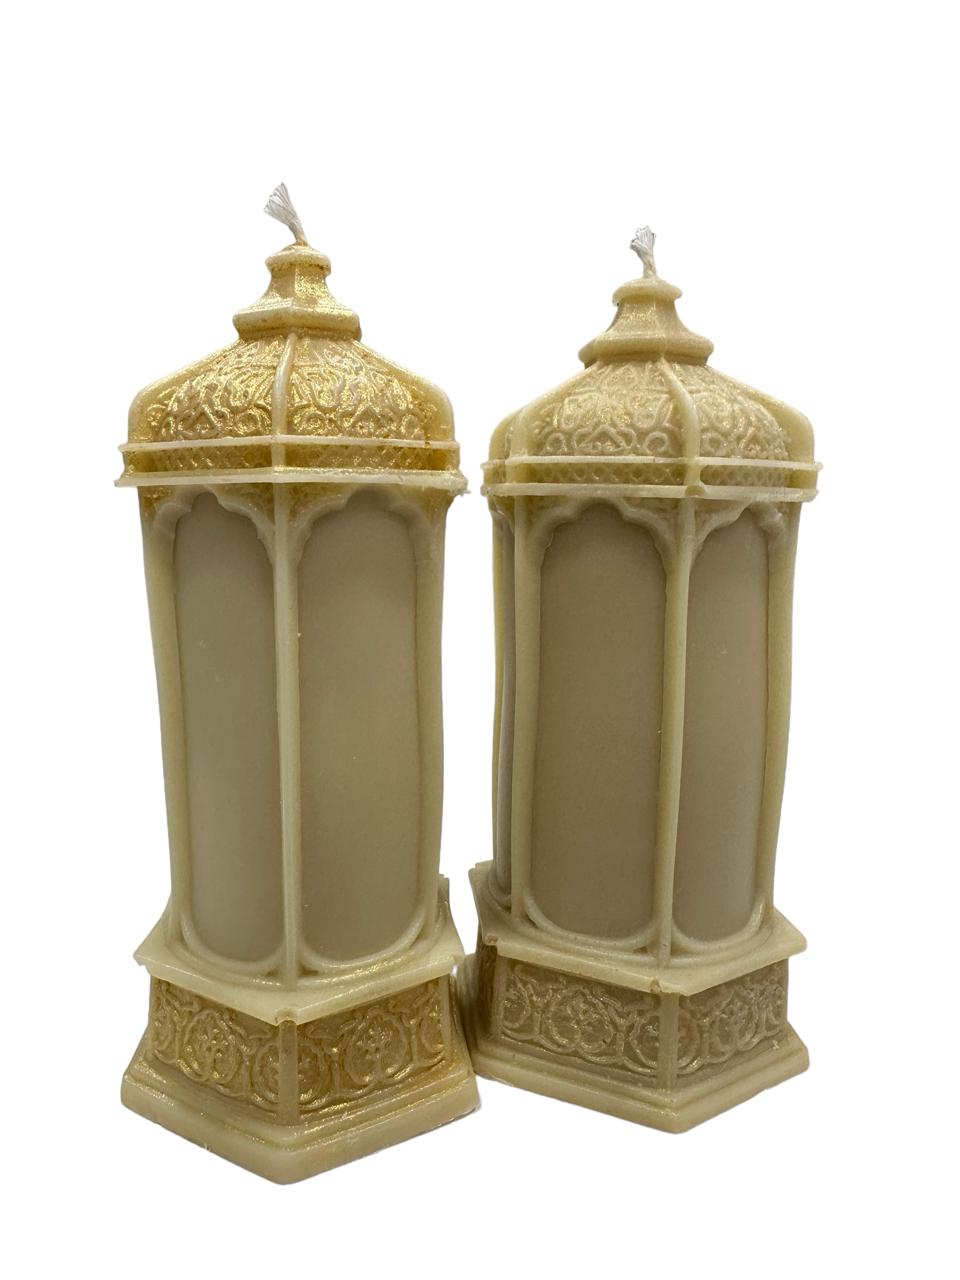 Vintage Scented Candle, 1 Each: A pair of elegant, vintage design scented candles, perfect for adding a warm ambience to any setting.